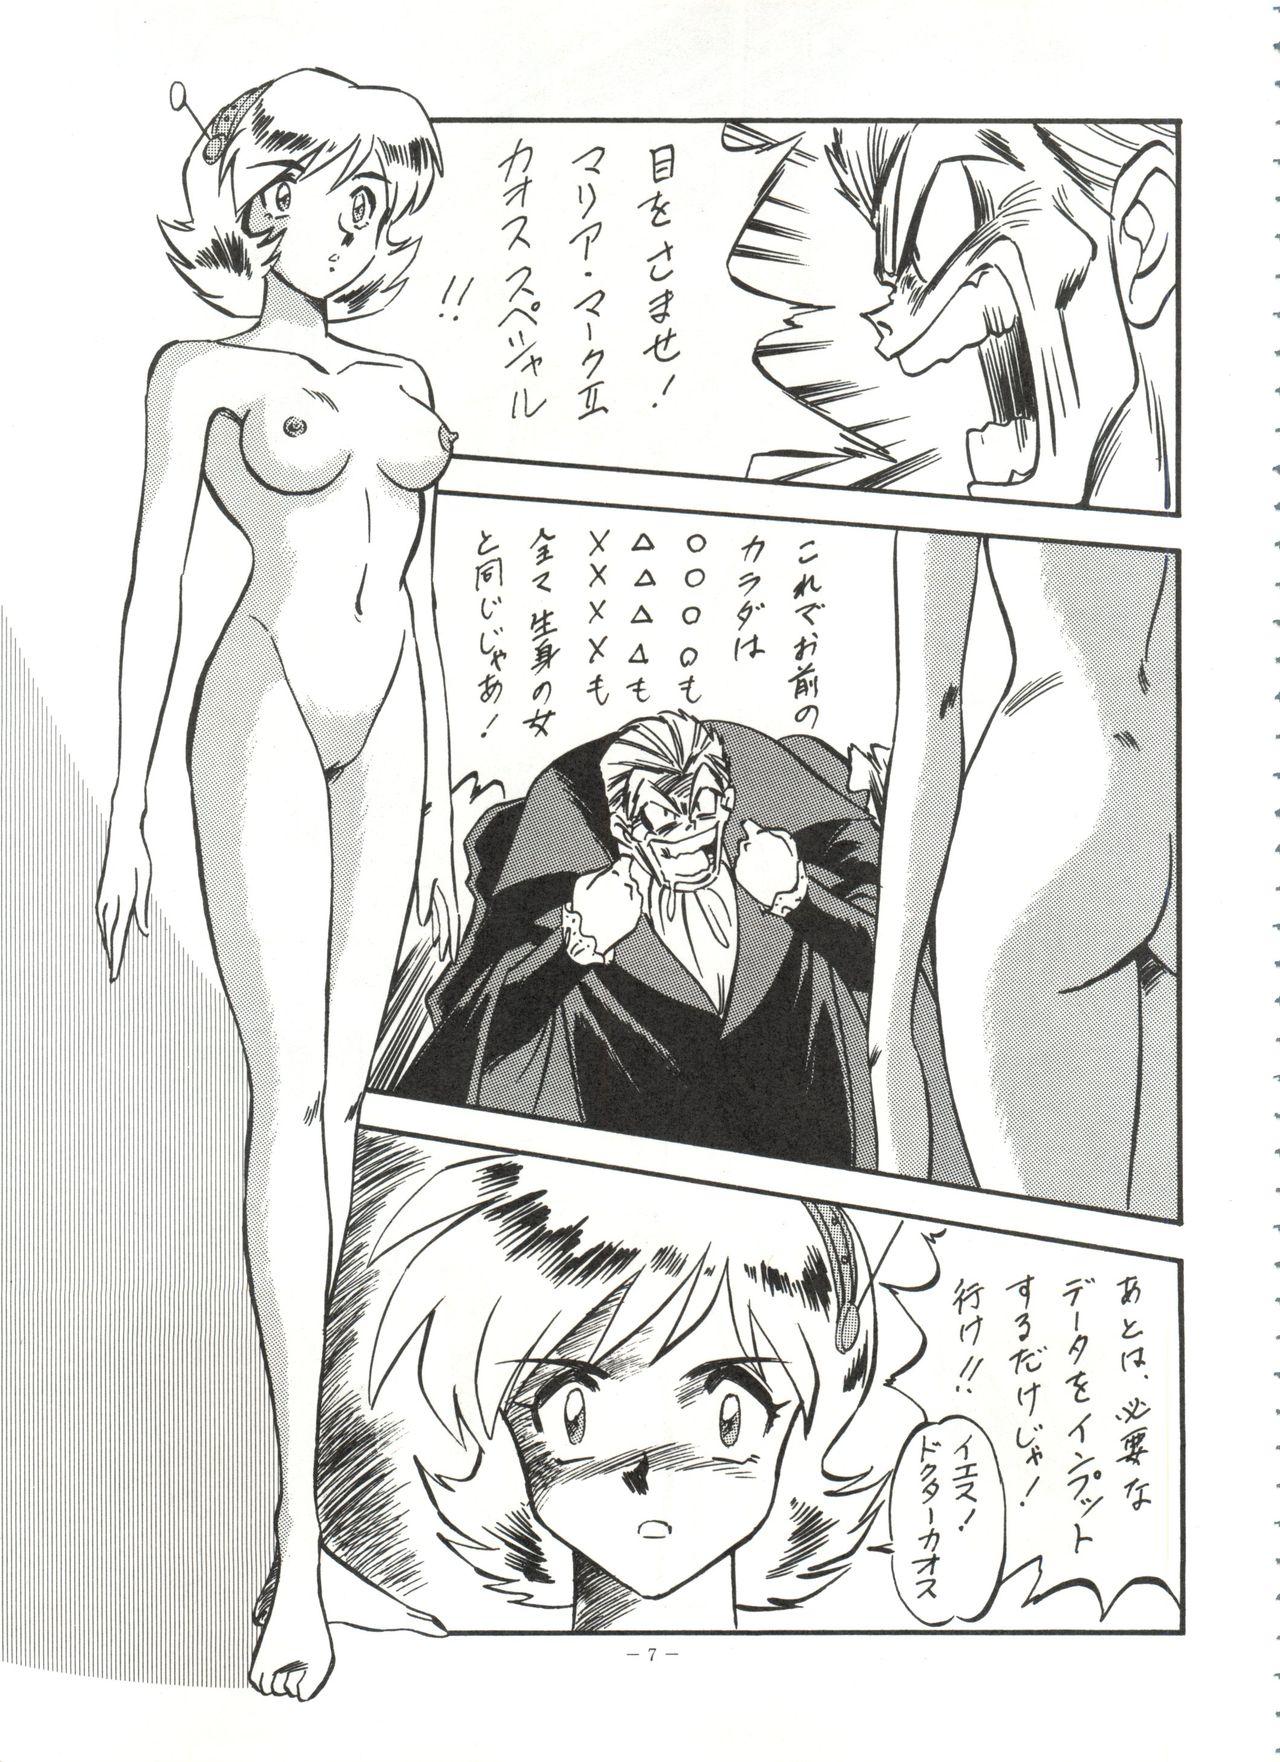 Fuck Com LOOK OUT 31 - Sailor moon Ghost sweeper mikami Lord of lords ryu knight Patlabor Brave police j decker Thuylinh - Page 6